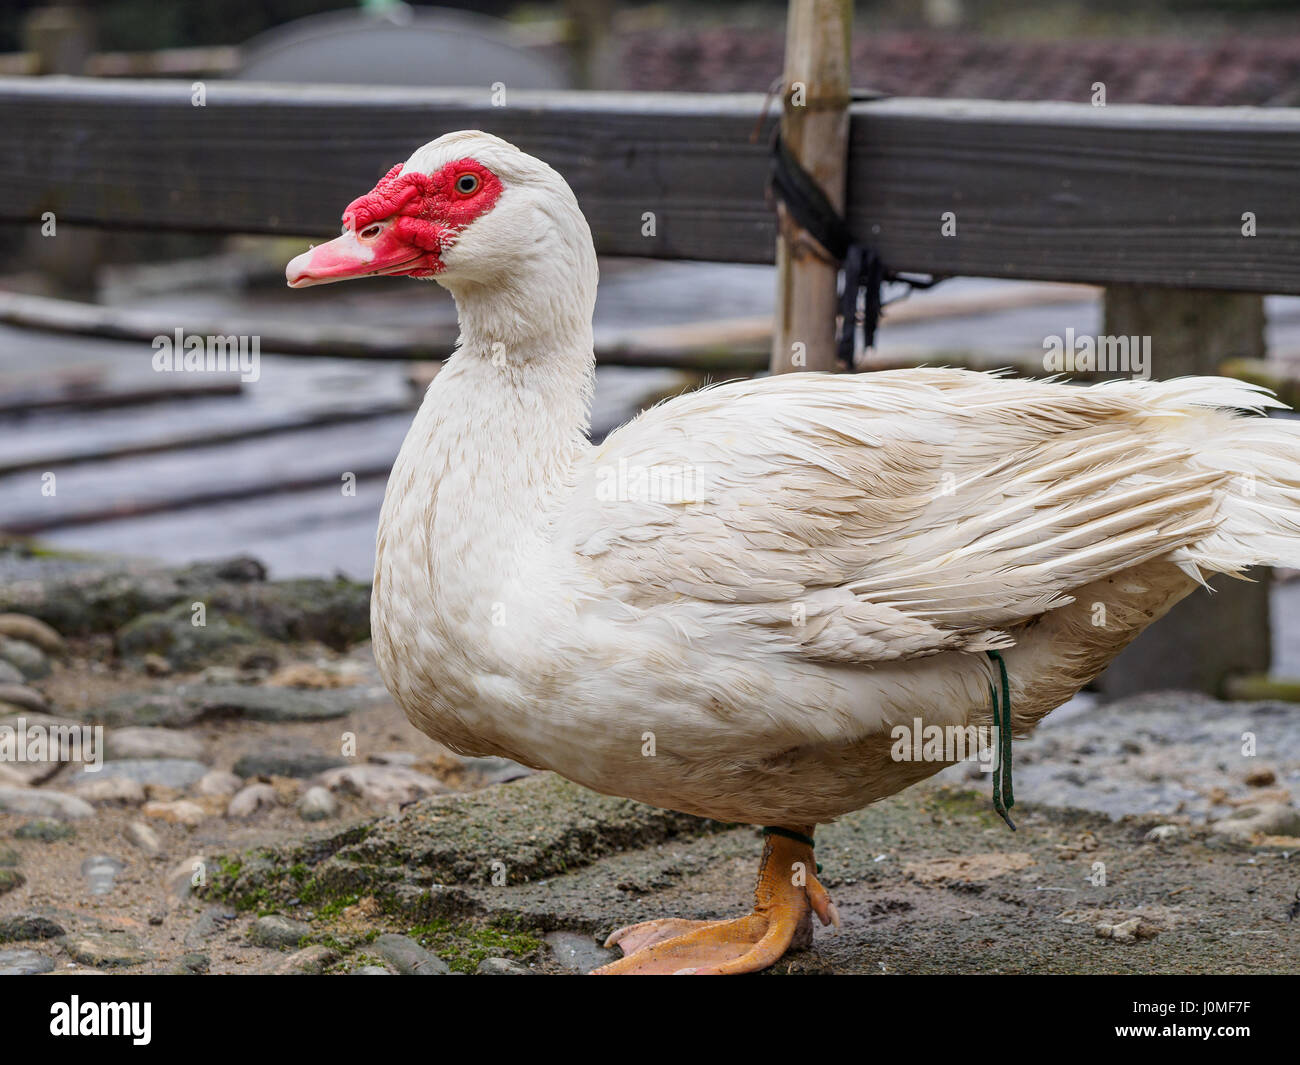 White duck with red nose standing on ground. Stock Photo